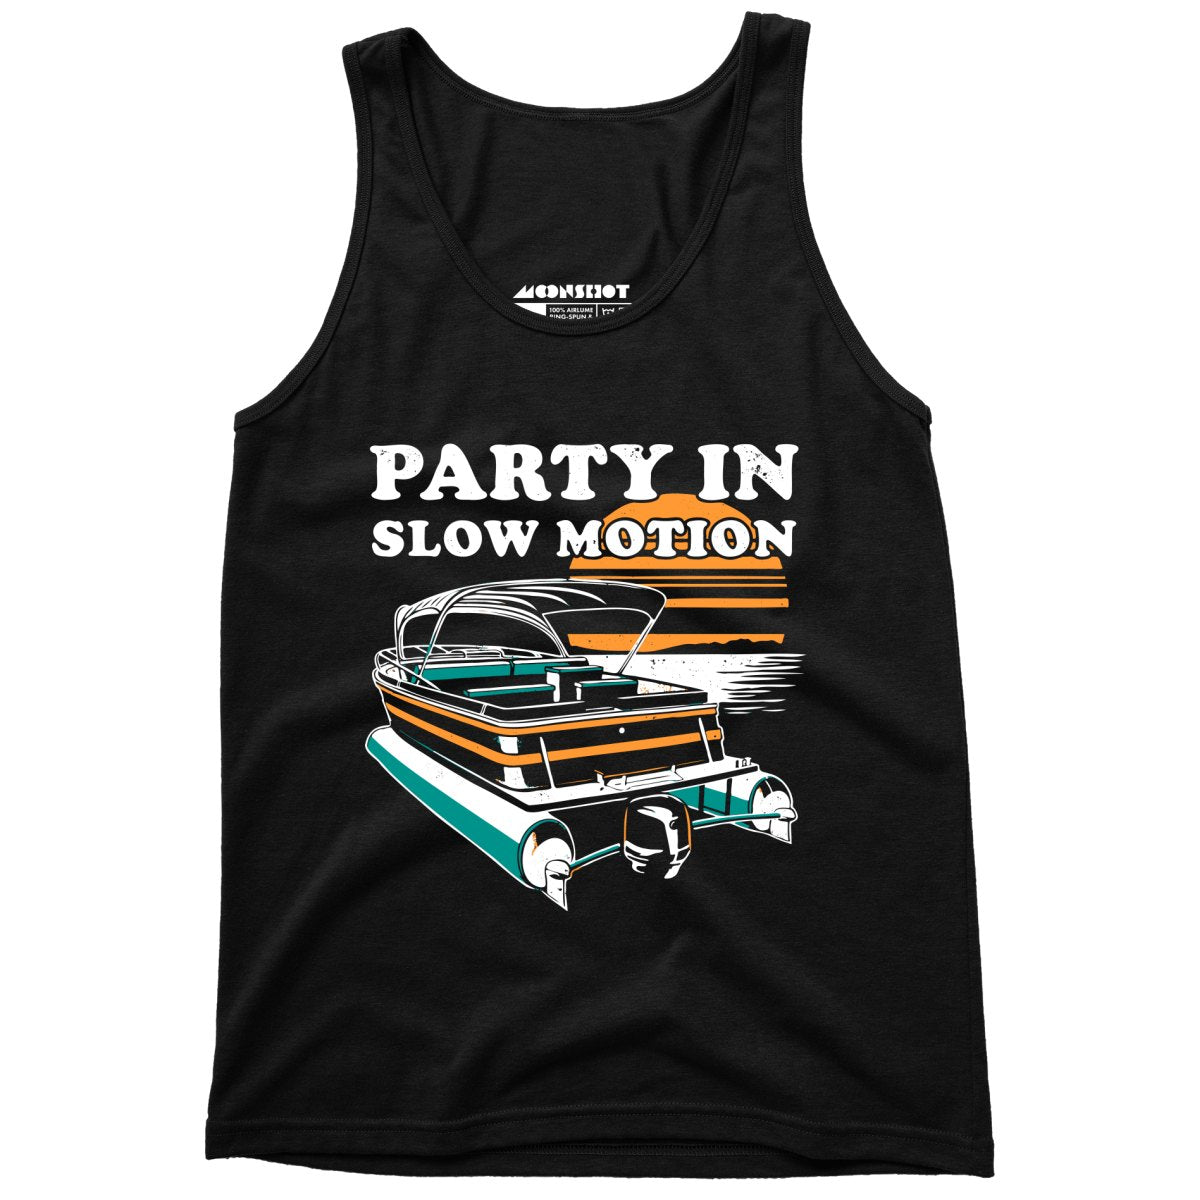 Party in Slow Motion - Unisex Tank Top